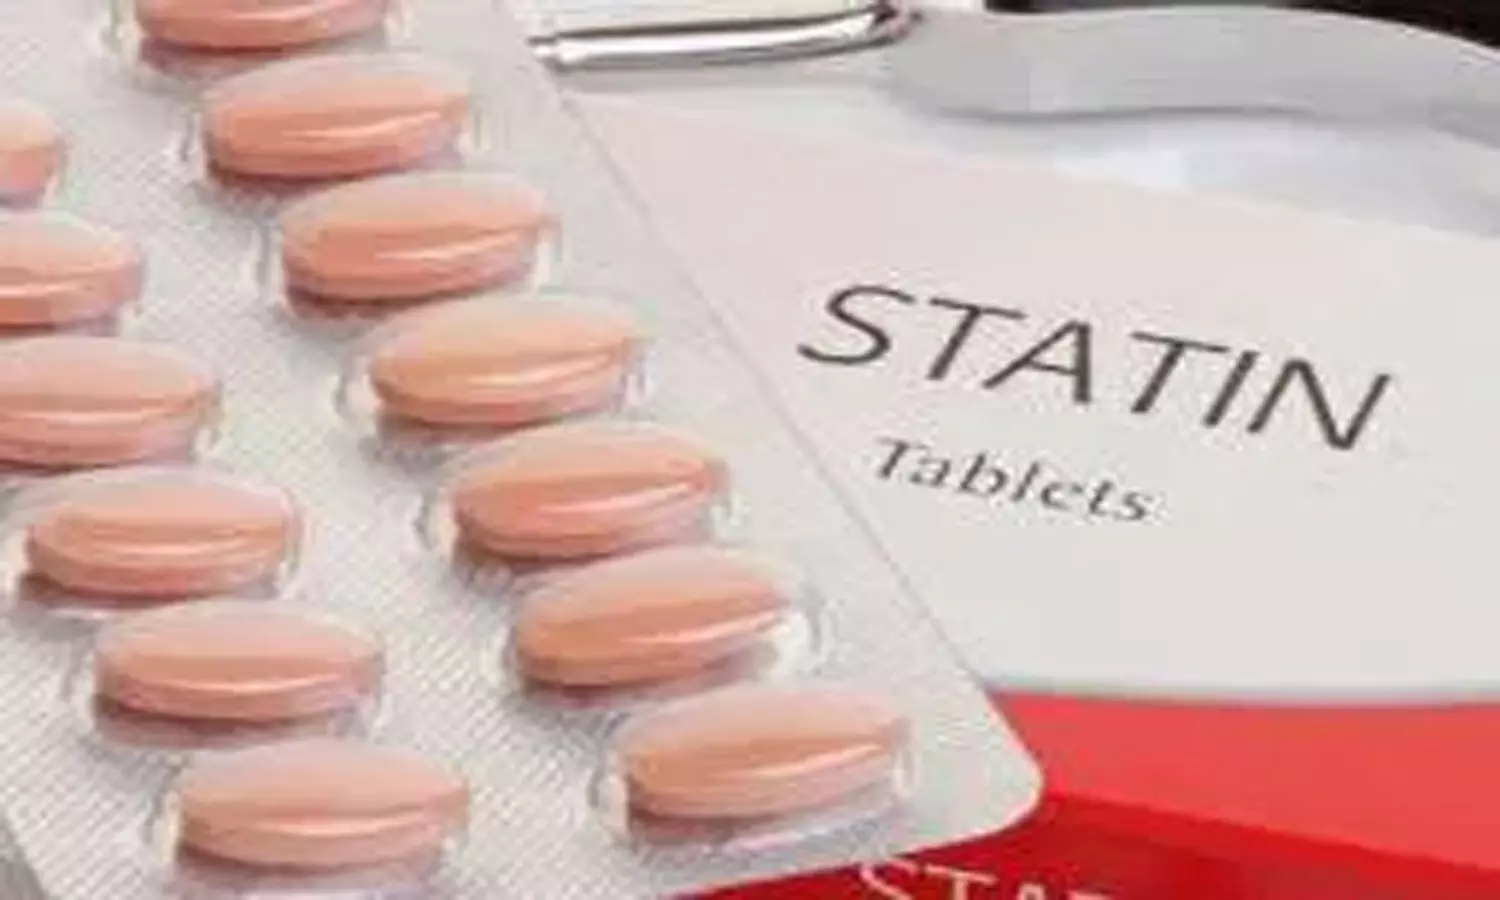 Statins may prevent adhesion-related complications after intra-abdominal surgery: JAMA